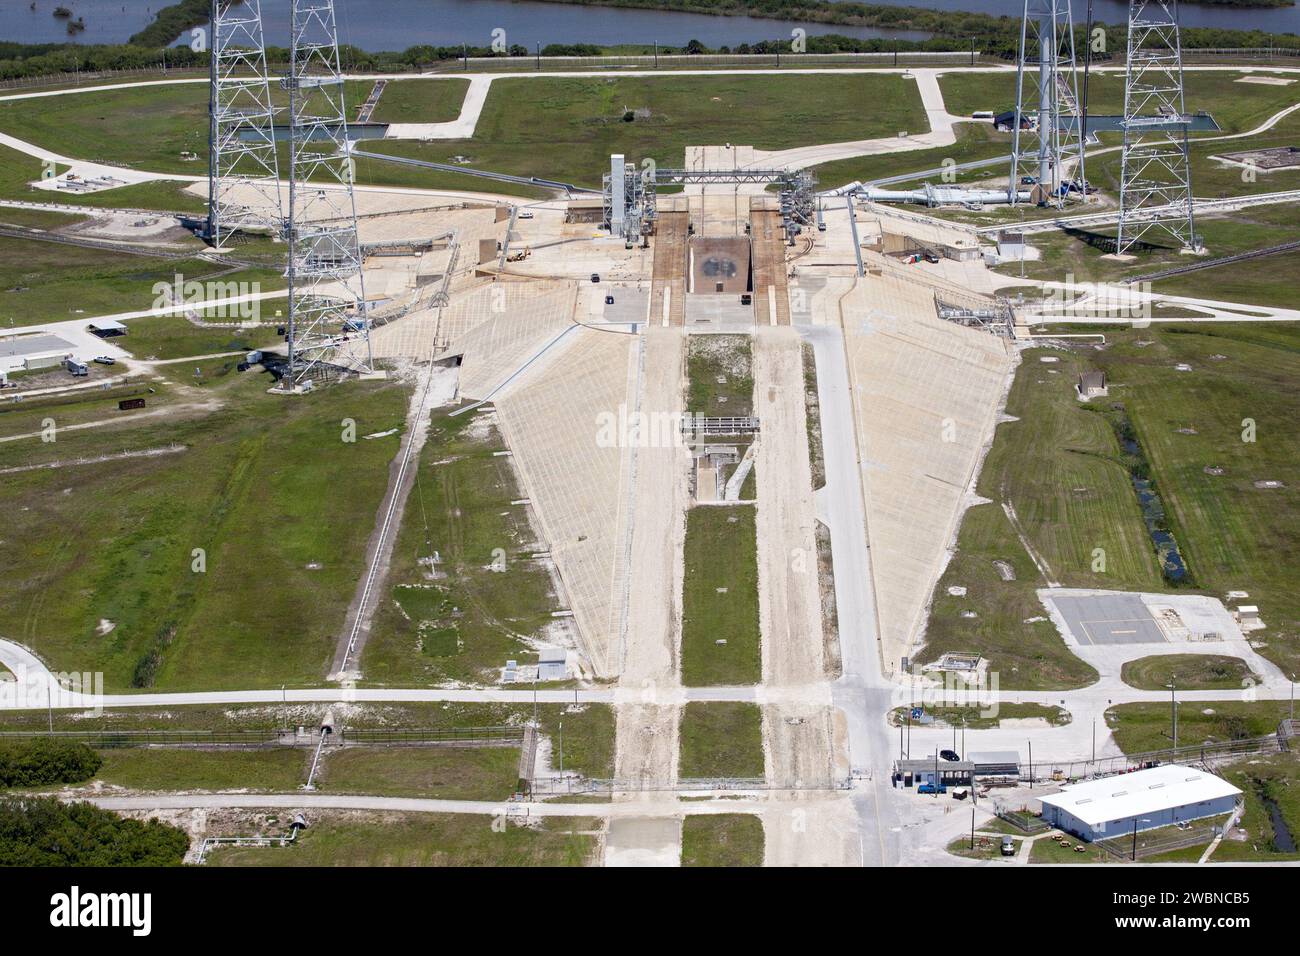 CAPE CANAVERAL, Fla. – An aerial view shows construction progress at Launch Pad 39B at NASA’s Kennedy Space Center in Florida. A new elevator has been constructed on the surface of the pad and the crawlerway leading up to the surface is being repaired. Repairs also are being made to the crawler track panels and catacomb roof below on either side of the flame trench. Also in view are portions of the water tower and the three tall lightning towers that surround the pad. Upgrades are underway at Pad B and other facilities in the Launch Complex 39 area. The Ground Systems Development and Operation Stock Photo